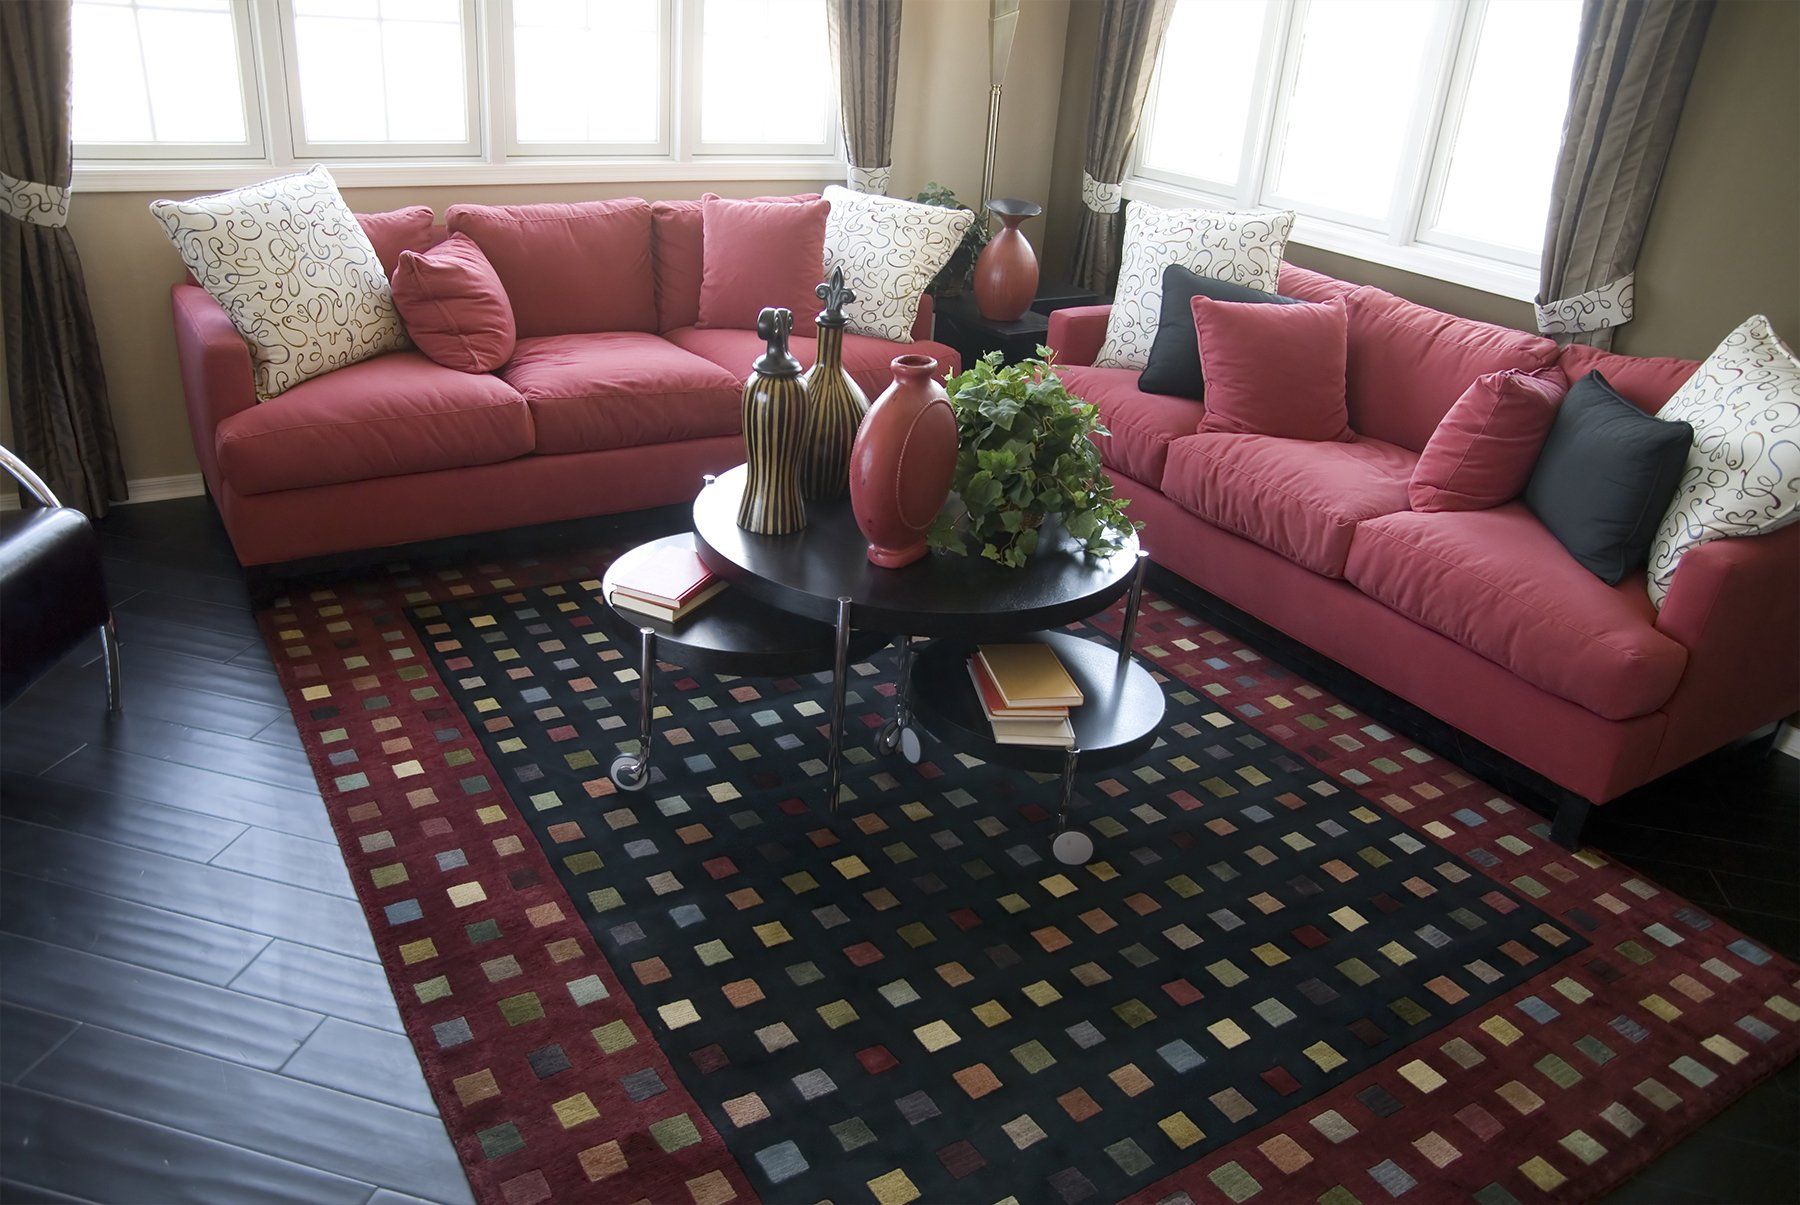 Importance of Clean Furnishings with Professional Rug and Carpet Cleaning Services